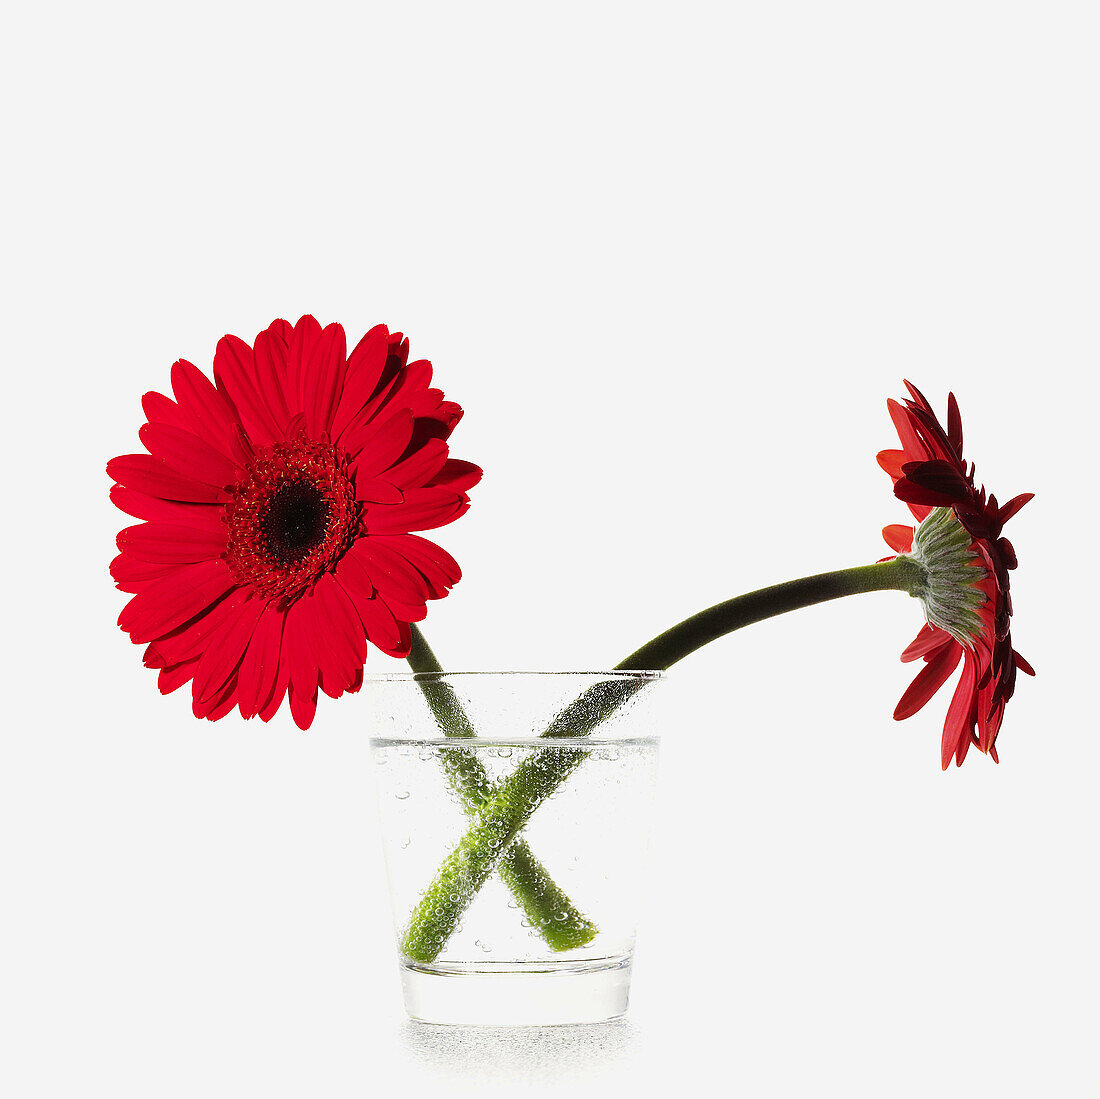 Close up, Close-up, Closeup, Color, Colour, Concept, Concepts, Decoration, Ephemeral, Flower, Flowers, Glass, Glasses, Indoor, Indoors, Inside, Interior, Nature, Pair, Plant, Plants, Red, Soda, Square, Still life, Two, Water, M50-354295, agefotostock